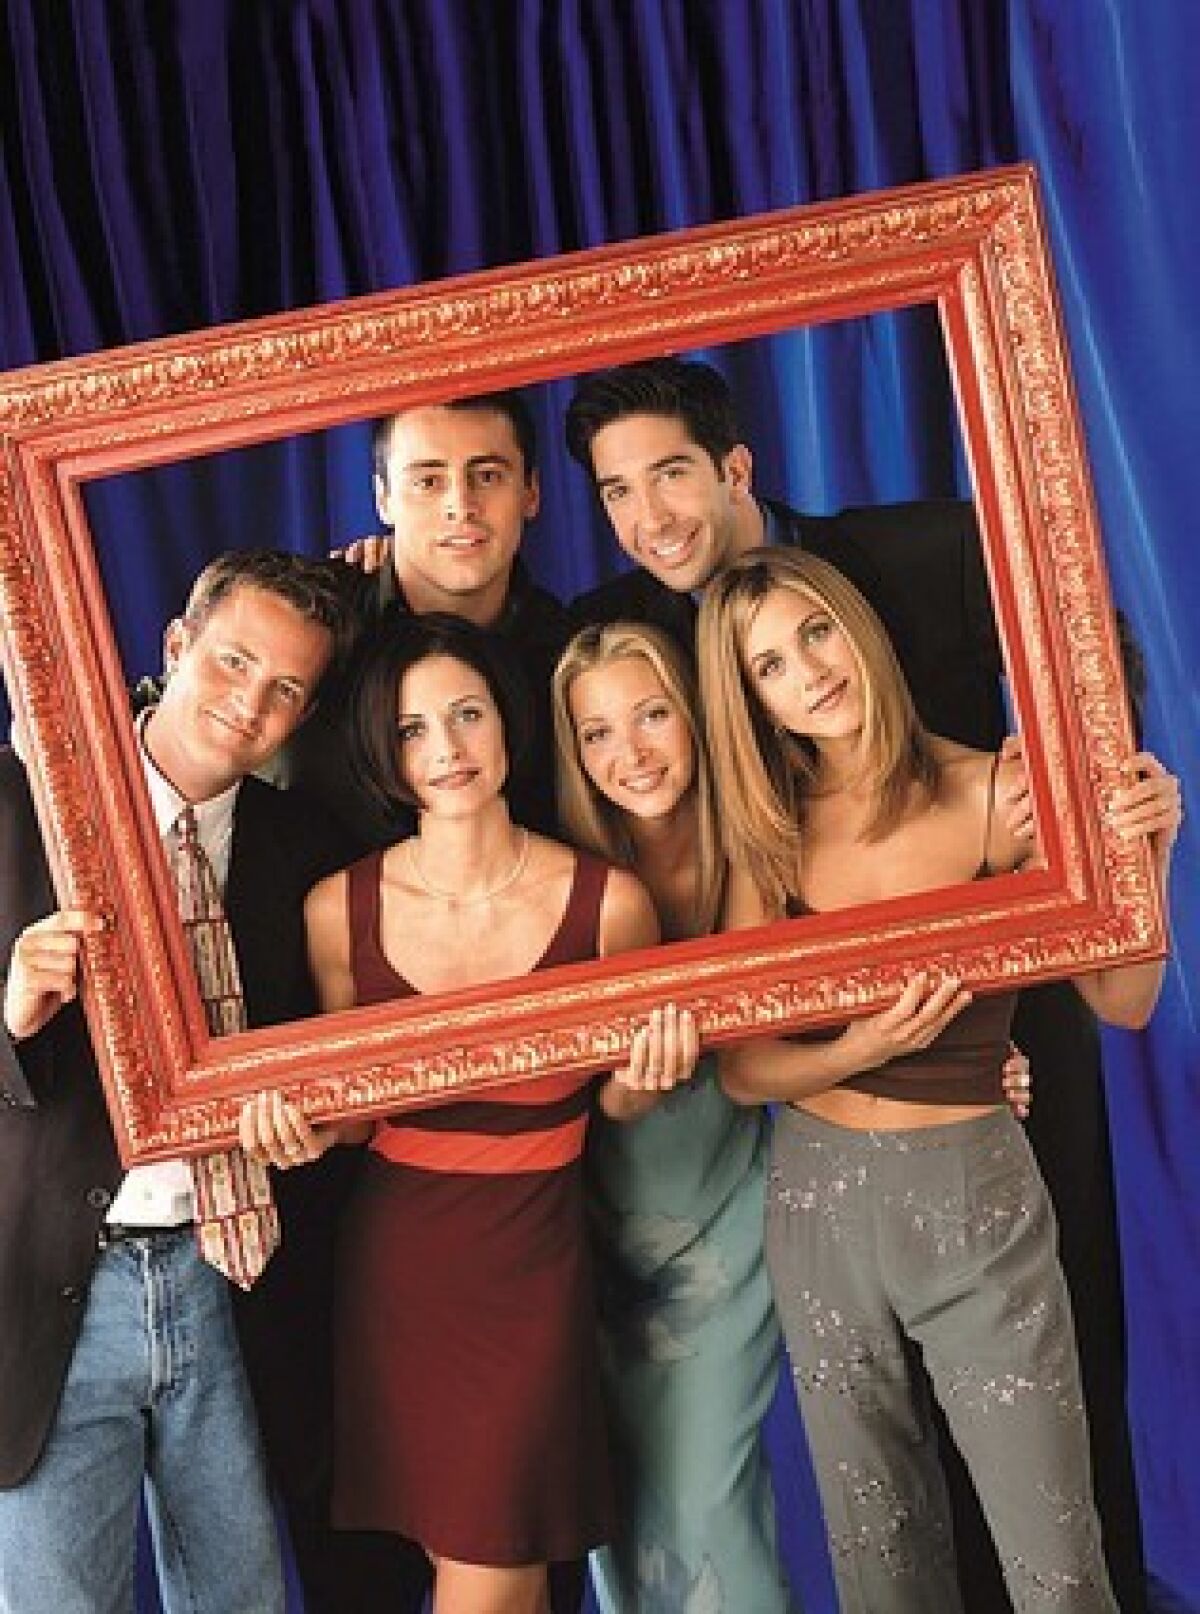 The cast of "Friends" holding a large photo frame around themselves.